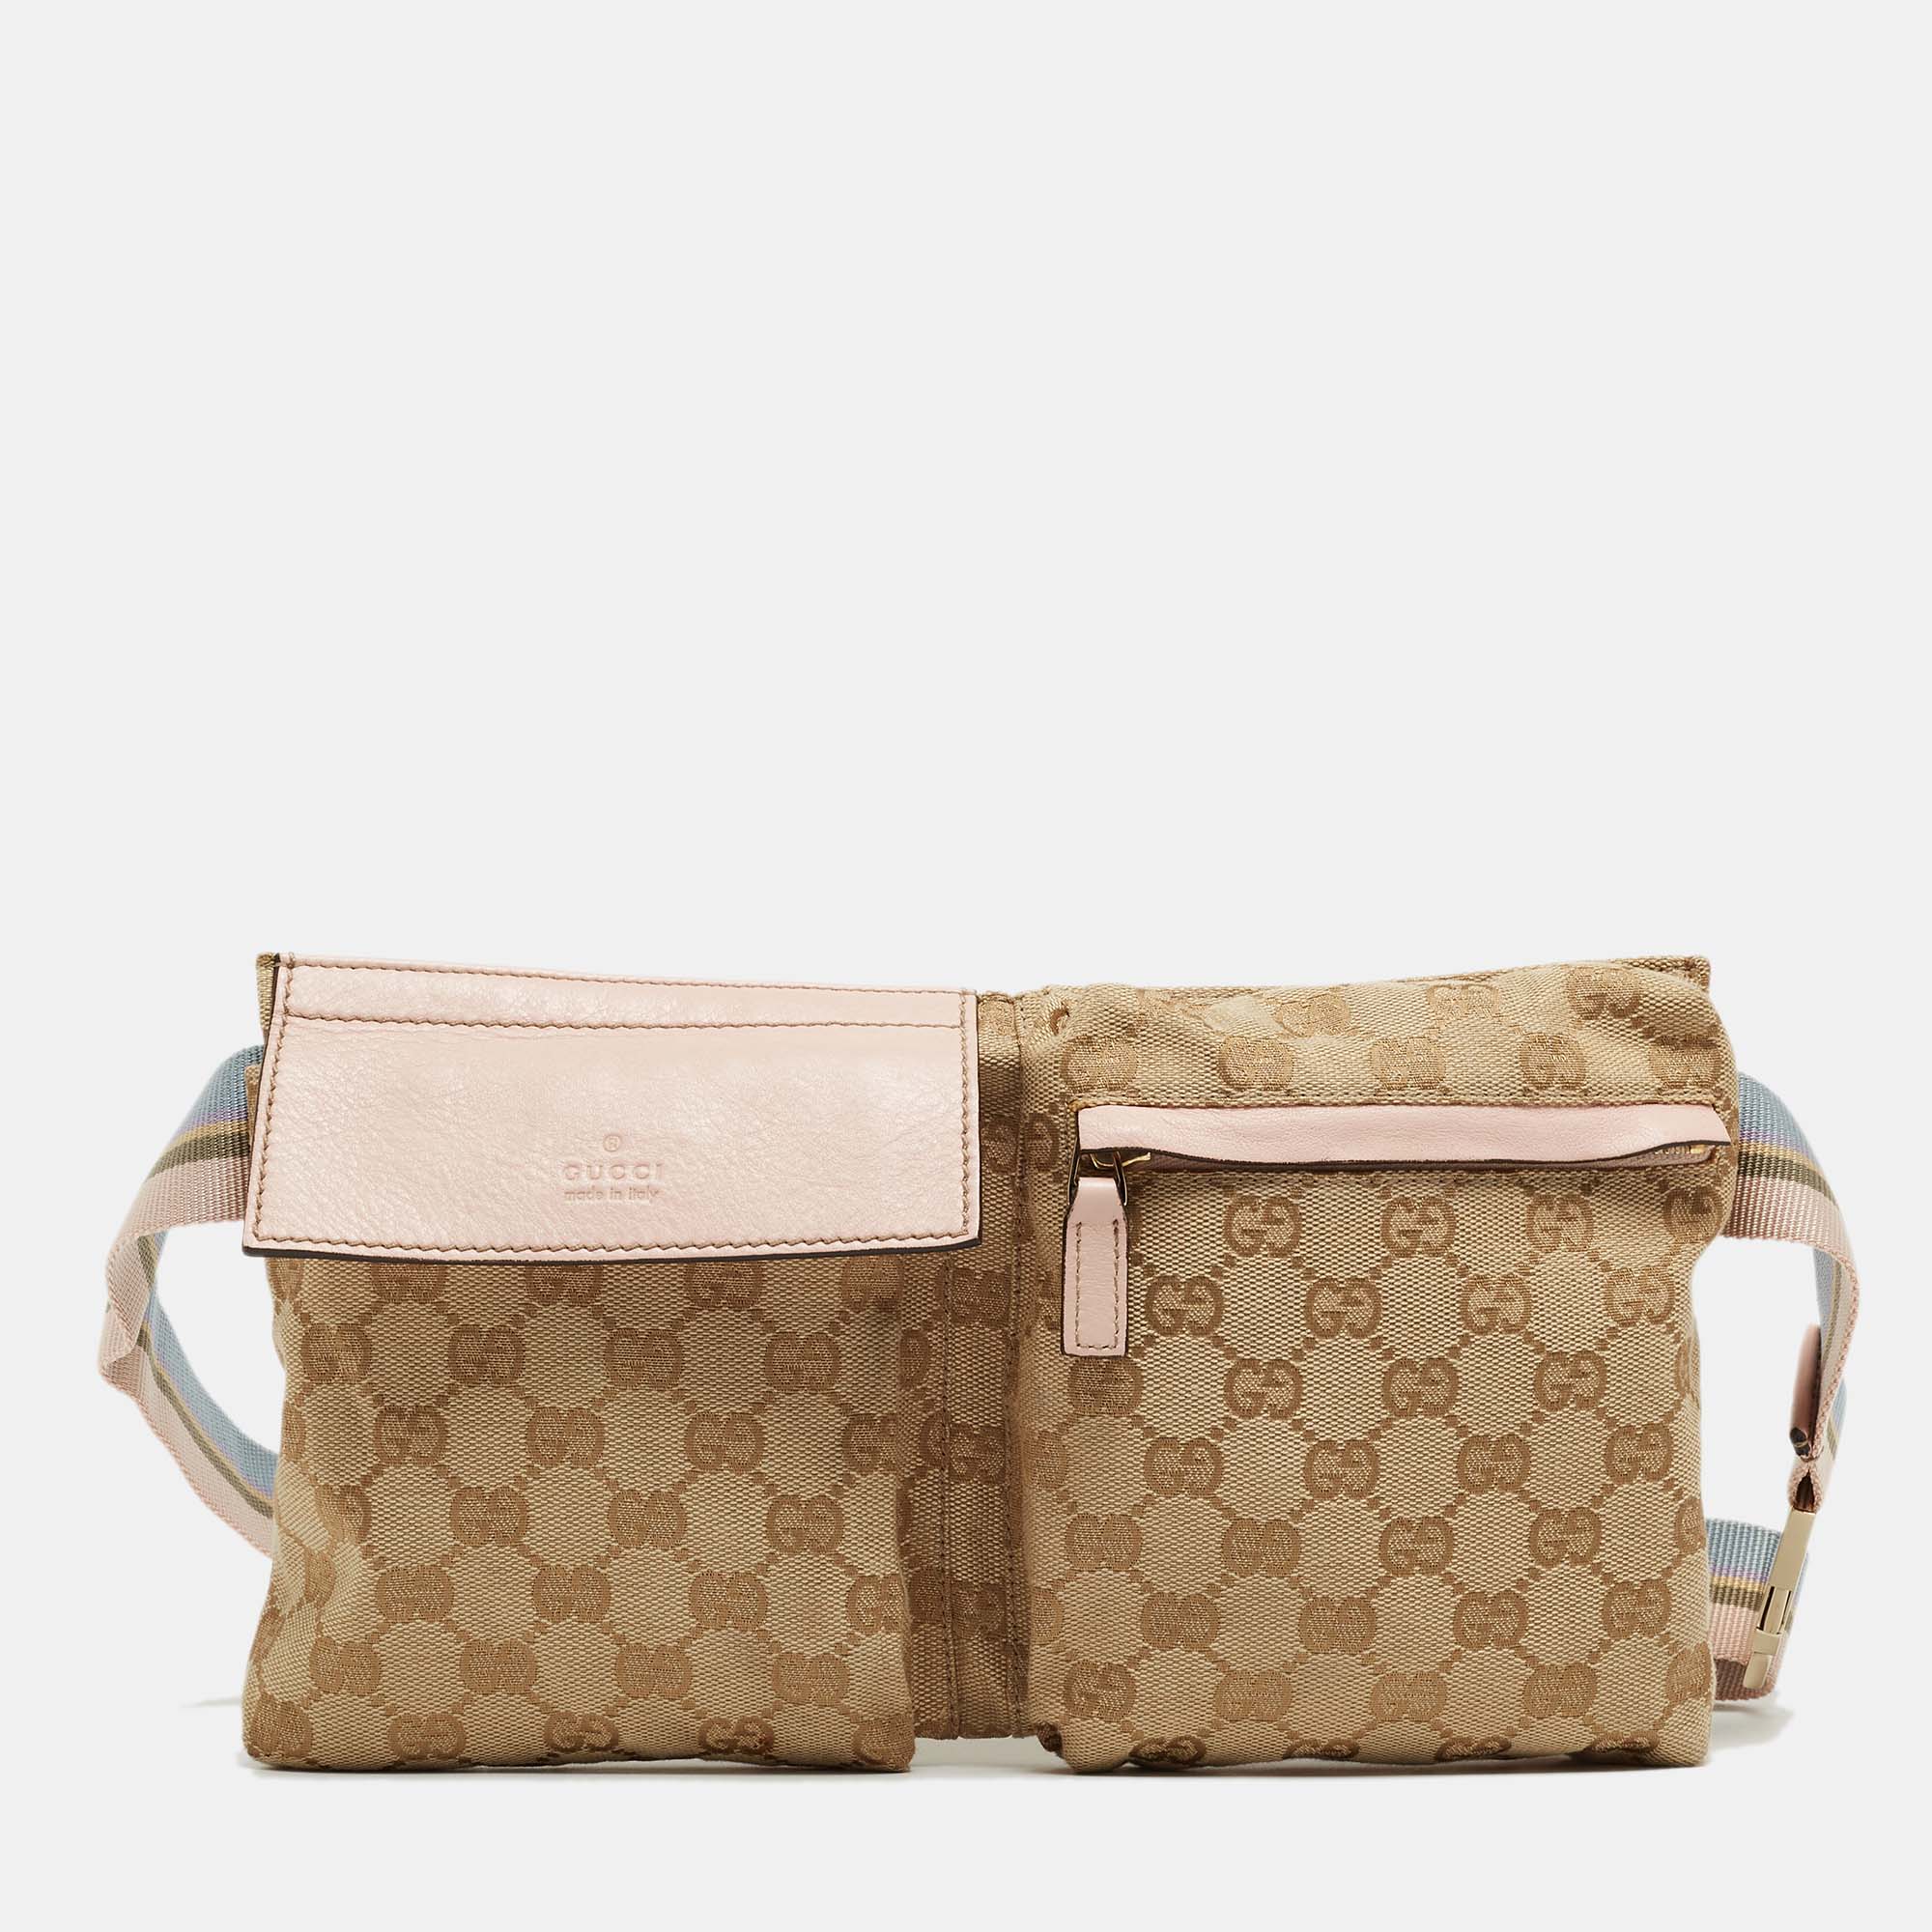 Gucci beige/pink gg canvas and leather double pocket belt bag